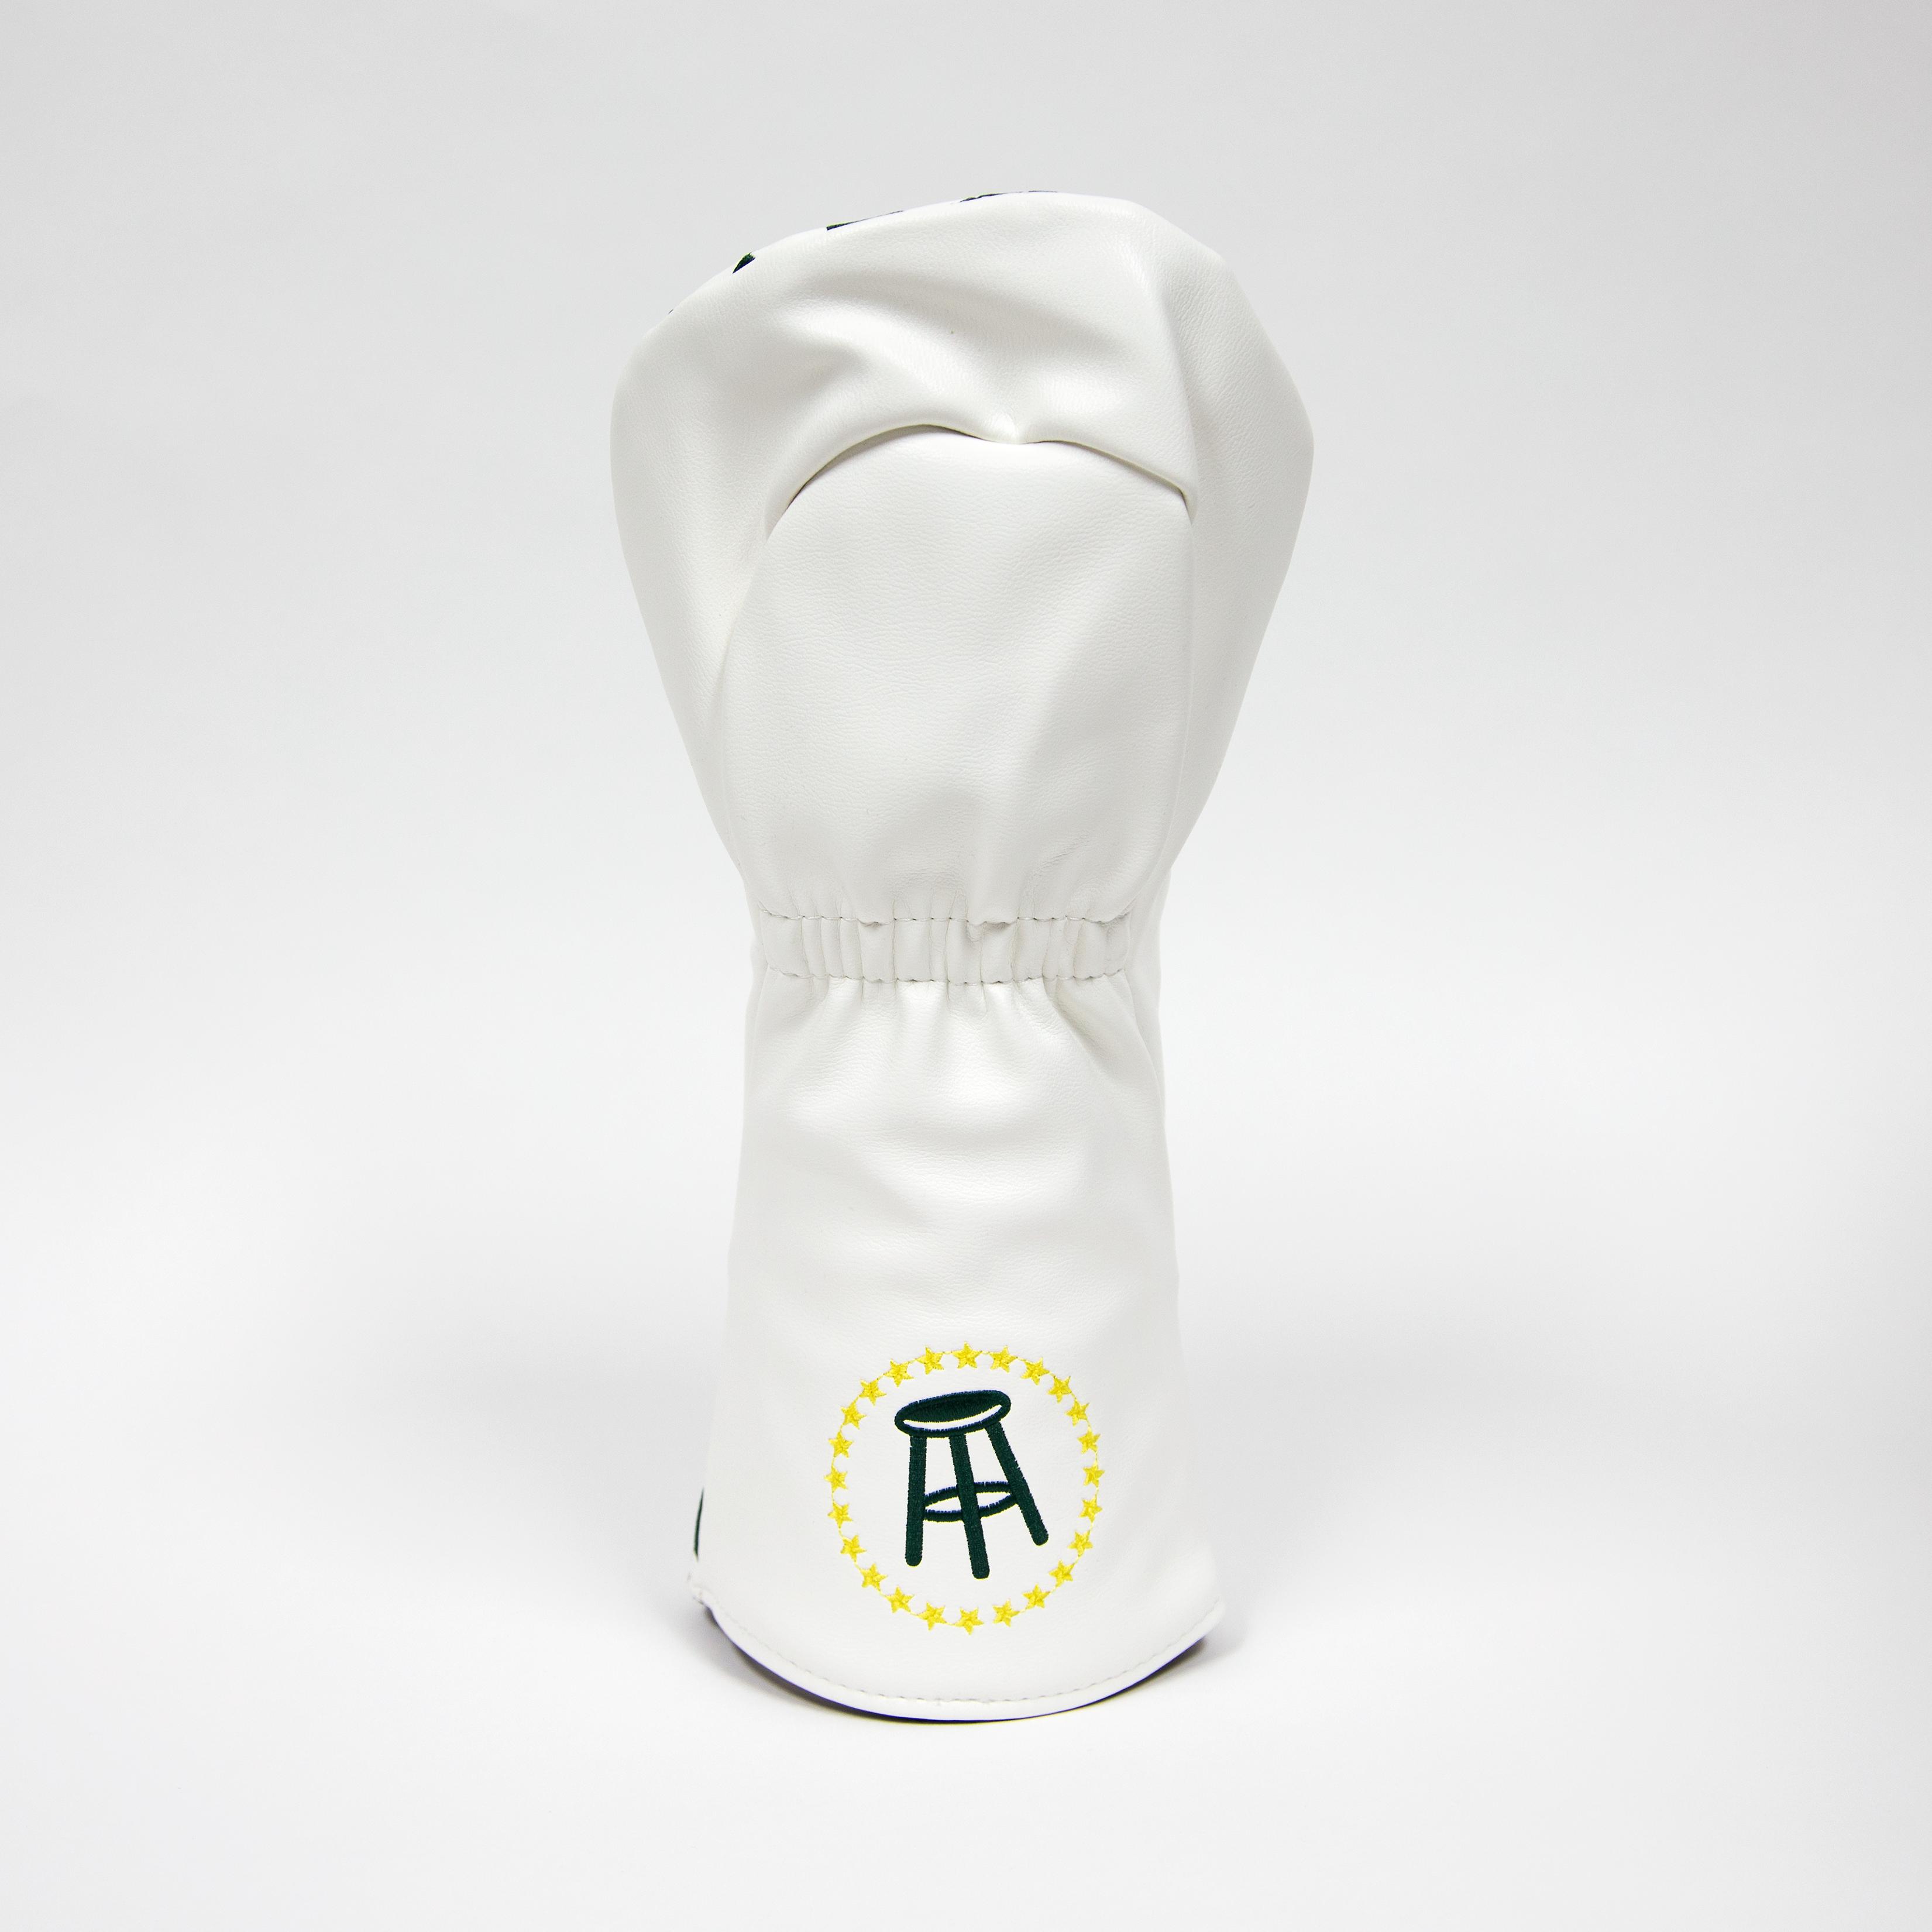 Fore Play Checkered Driver Headcover-Golf Accessories-Fore Play-Green-One Size-Barstool Sports